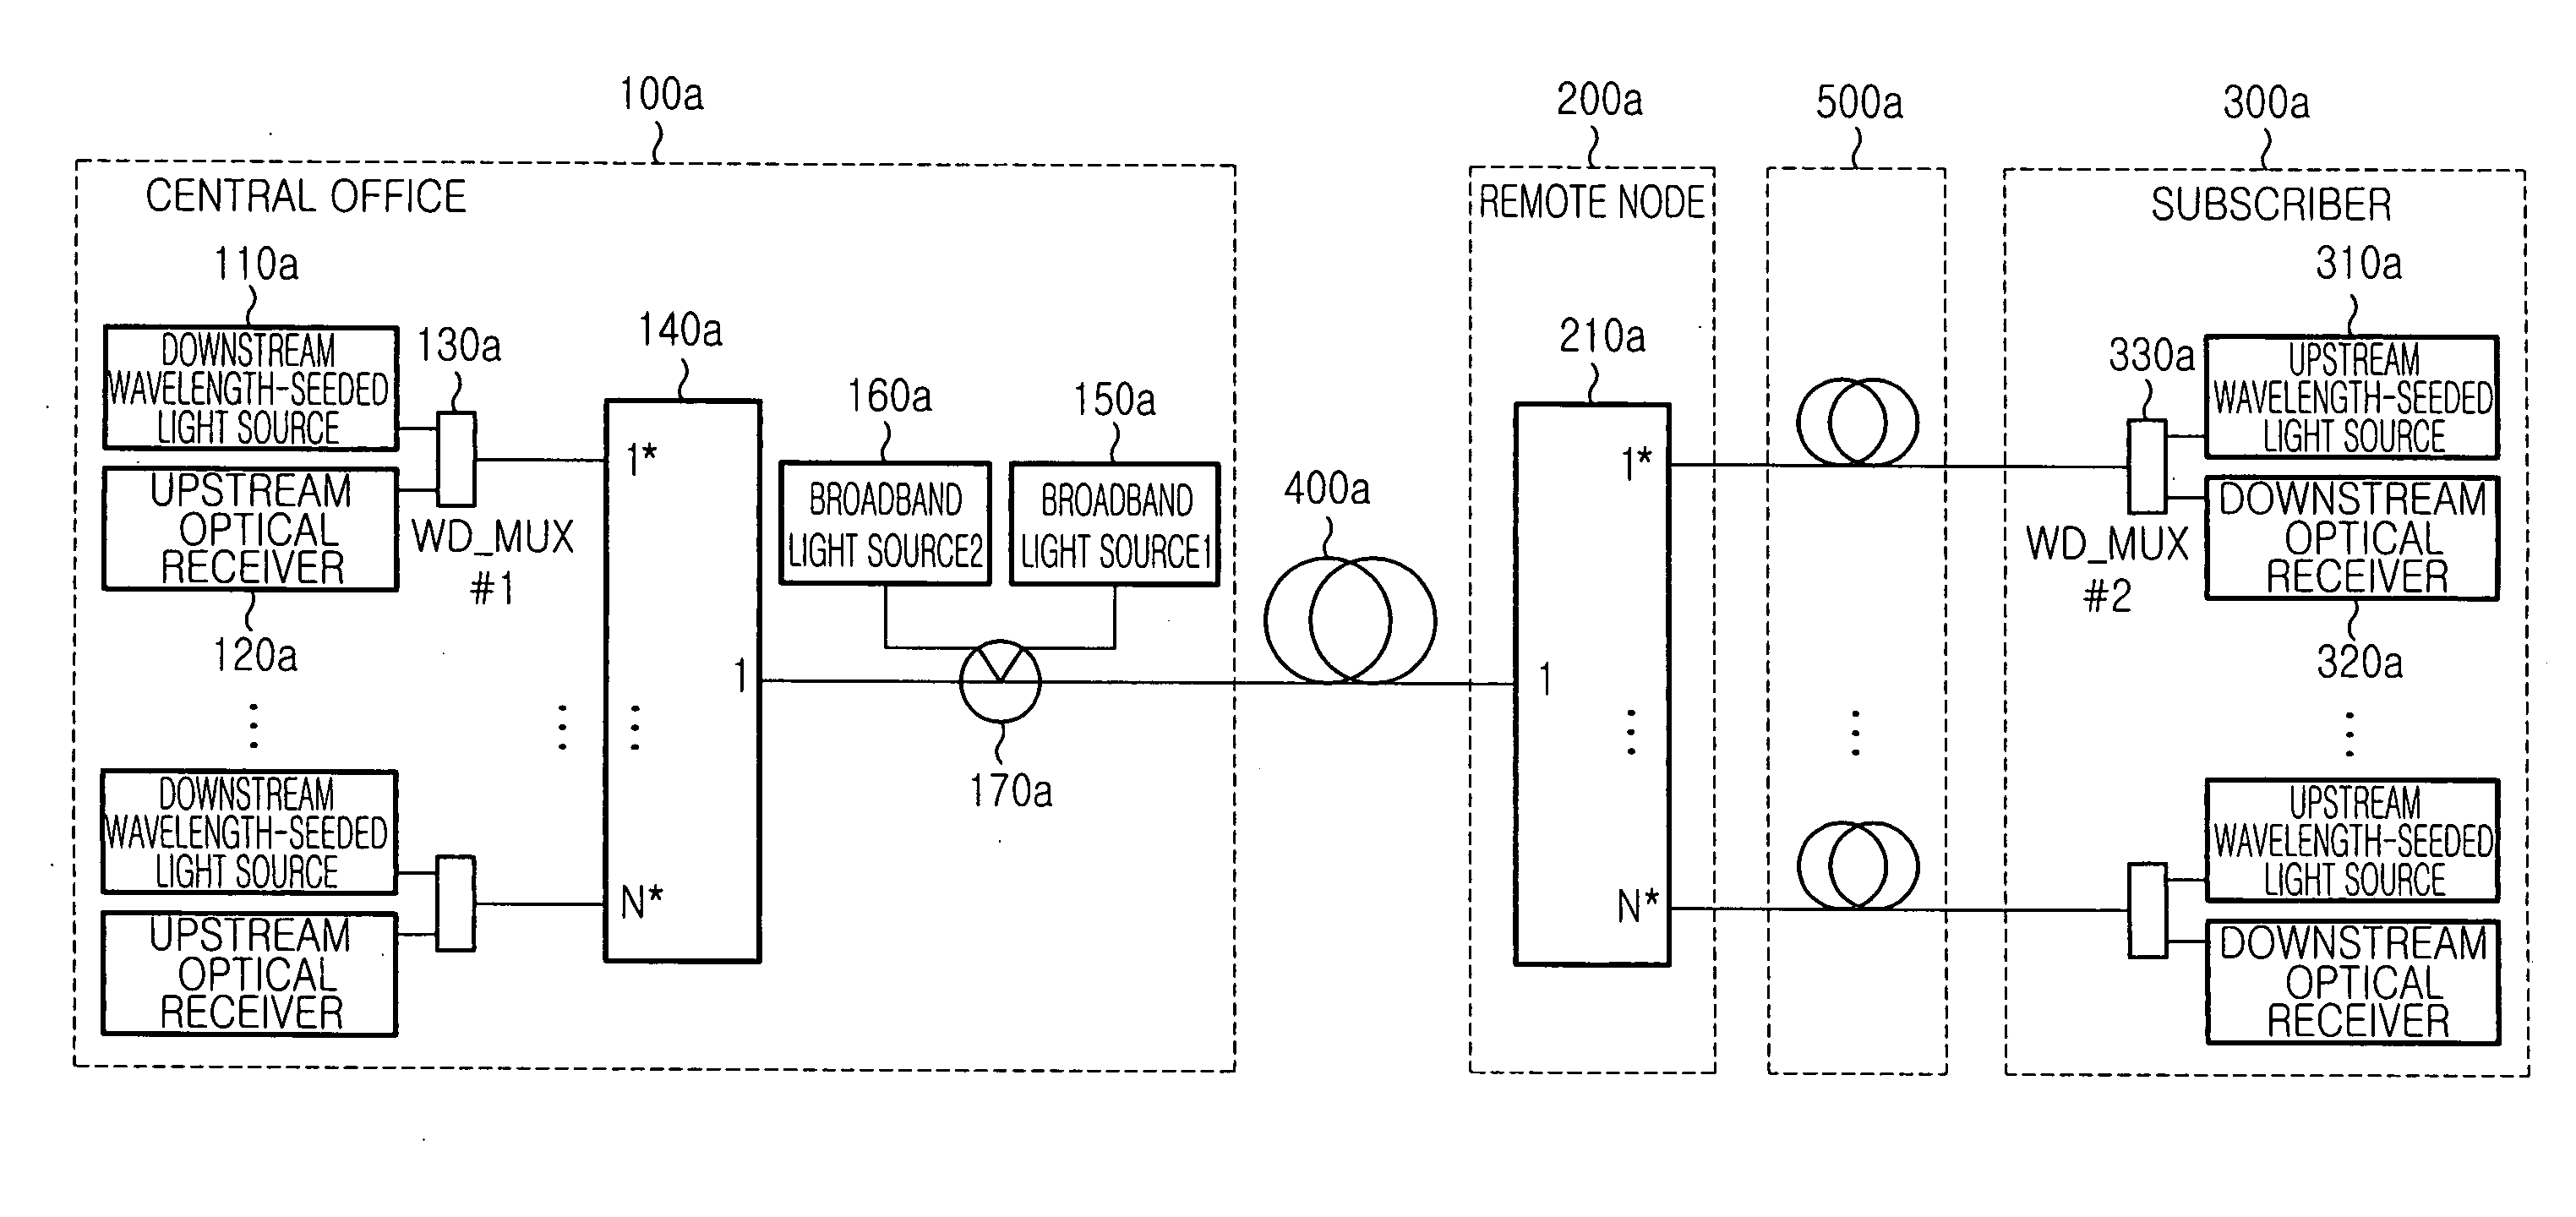 Wavelength-division-multiplexed passive optical network system using wavelength-seeded light source